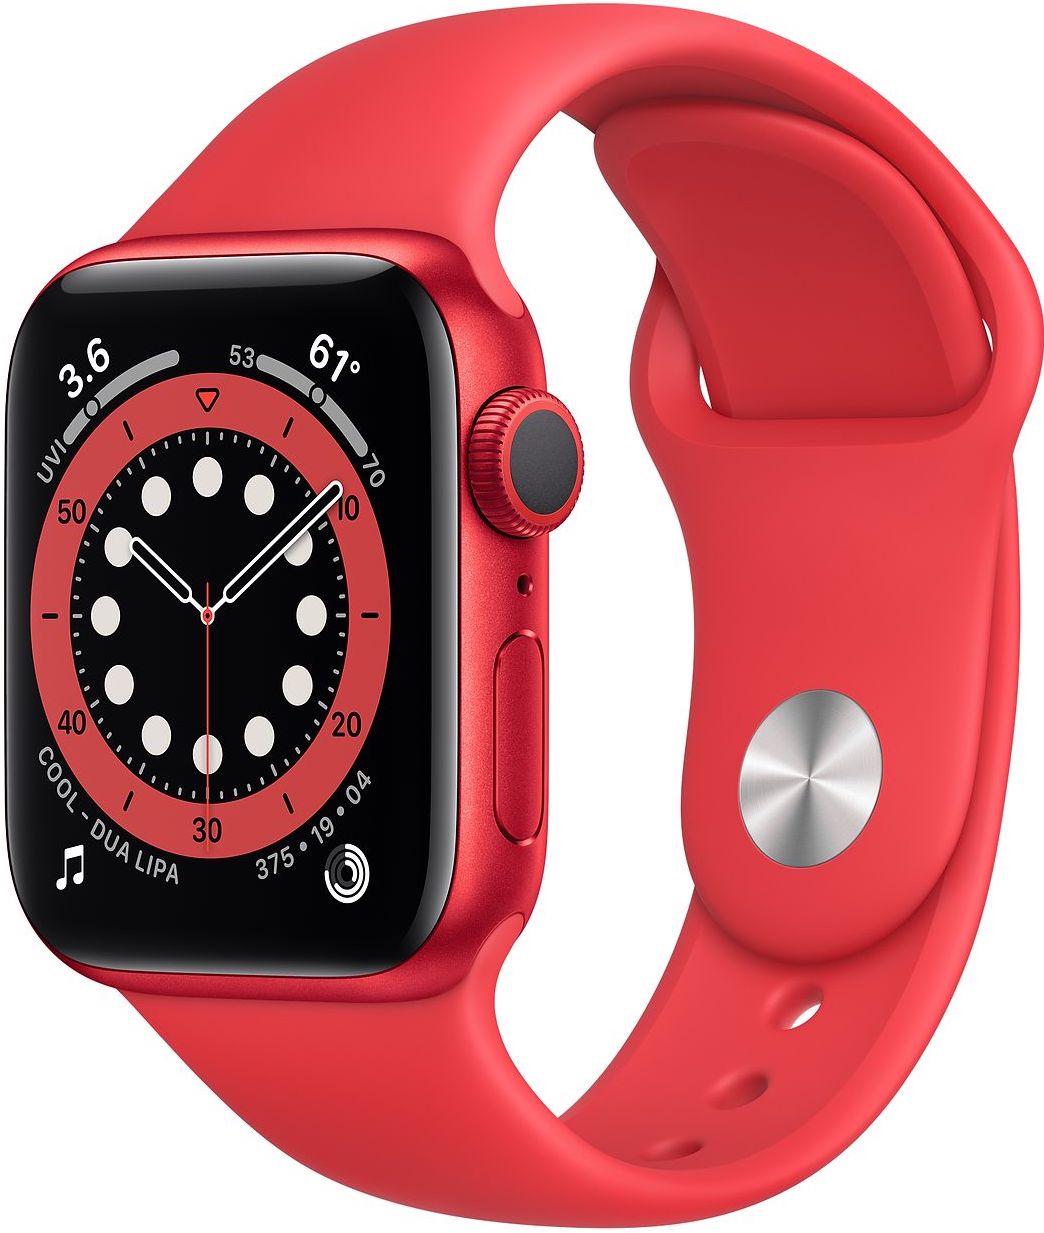 Producto Apple Watch Series 6 rojo